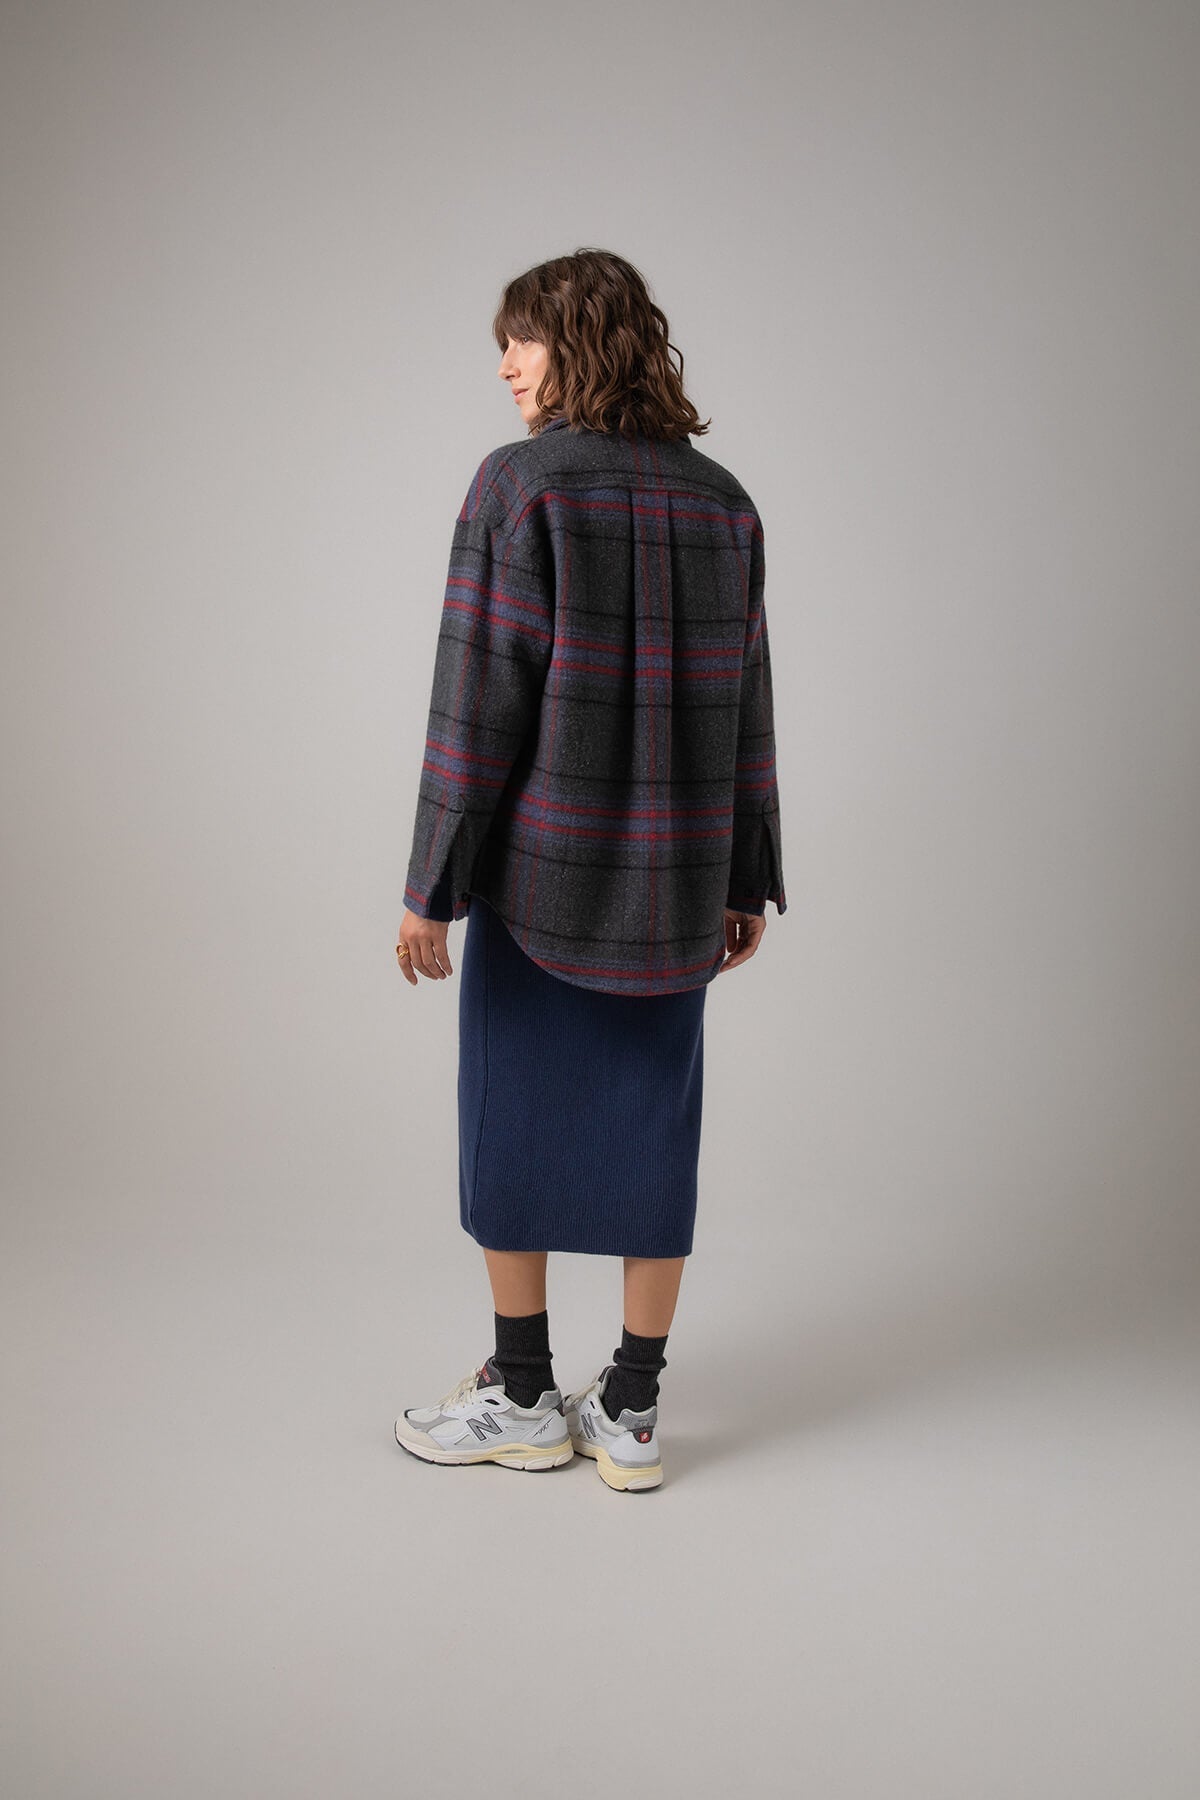 Back of Johnstons of Elgin Women's Wool Blend Oversized Shirt in Charcoal Check worn with a Navy Cashmere Sweater & Skirt on a grey background TB000630RU7387